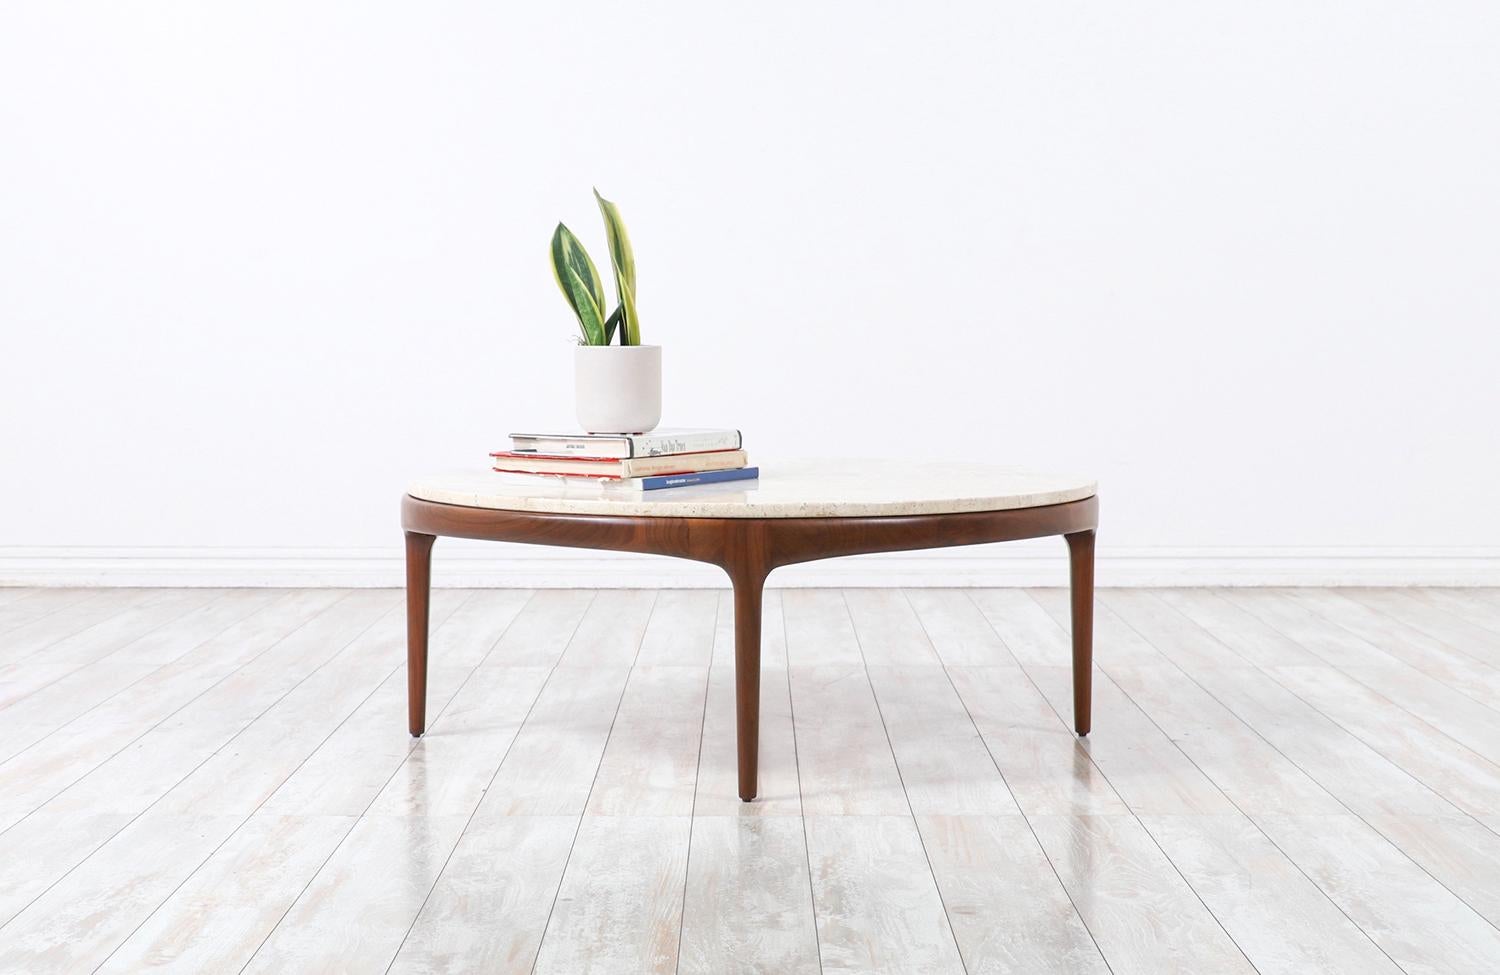 Mid-20th Century Mid-Century Modern “Rythm” Coffee Table with Travertine Stone Top by Lane